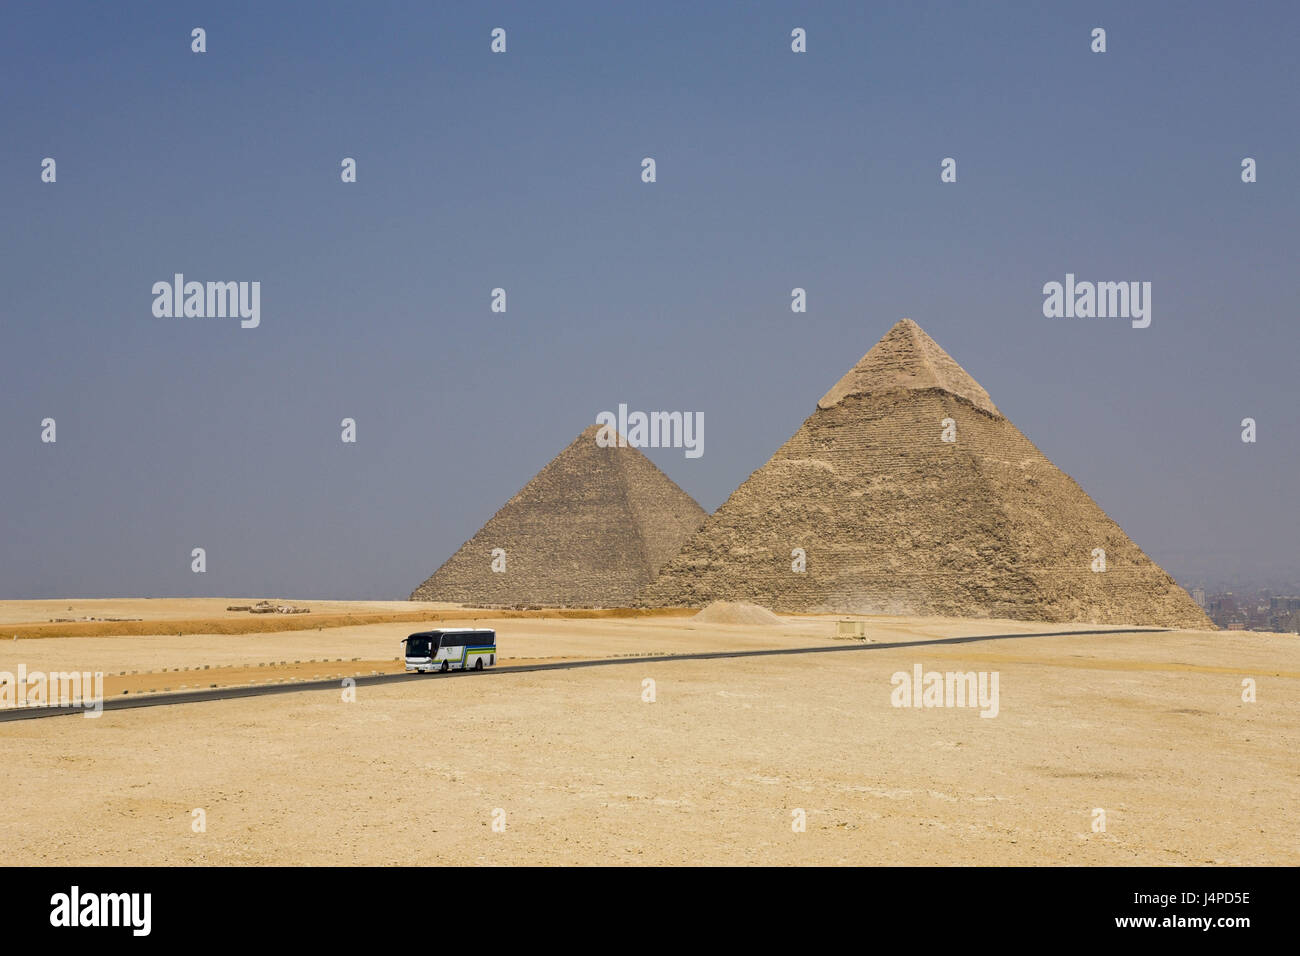 Chephren pyramid with Cheops Pyramide in the background, Egypt, Cairo, coach, Stock Photo